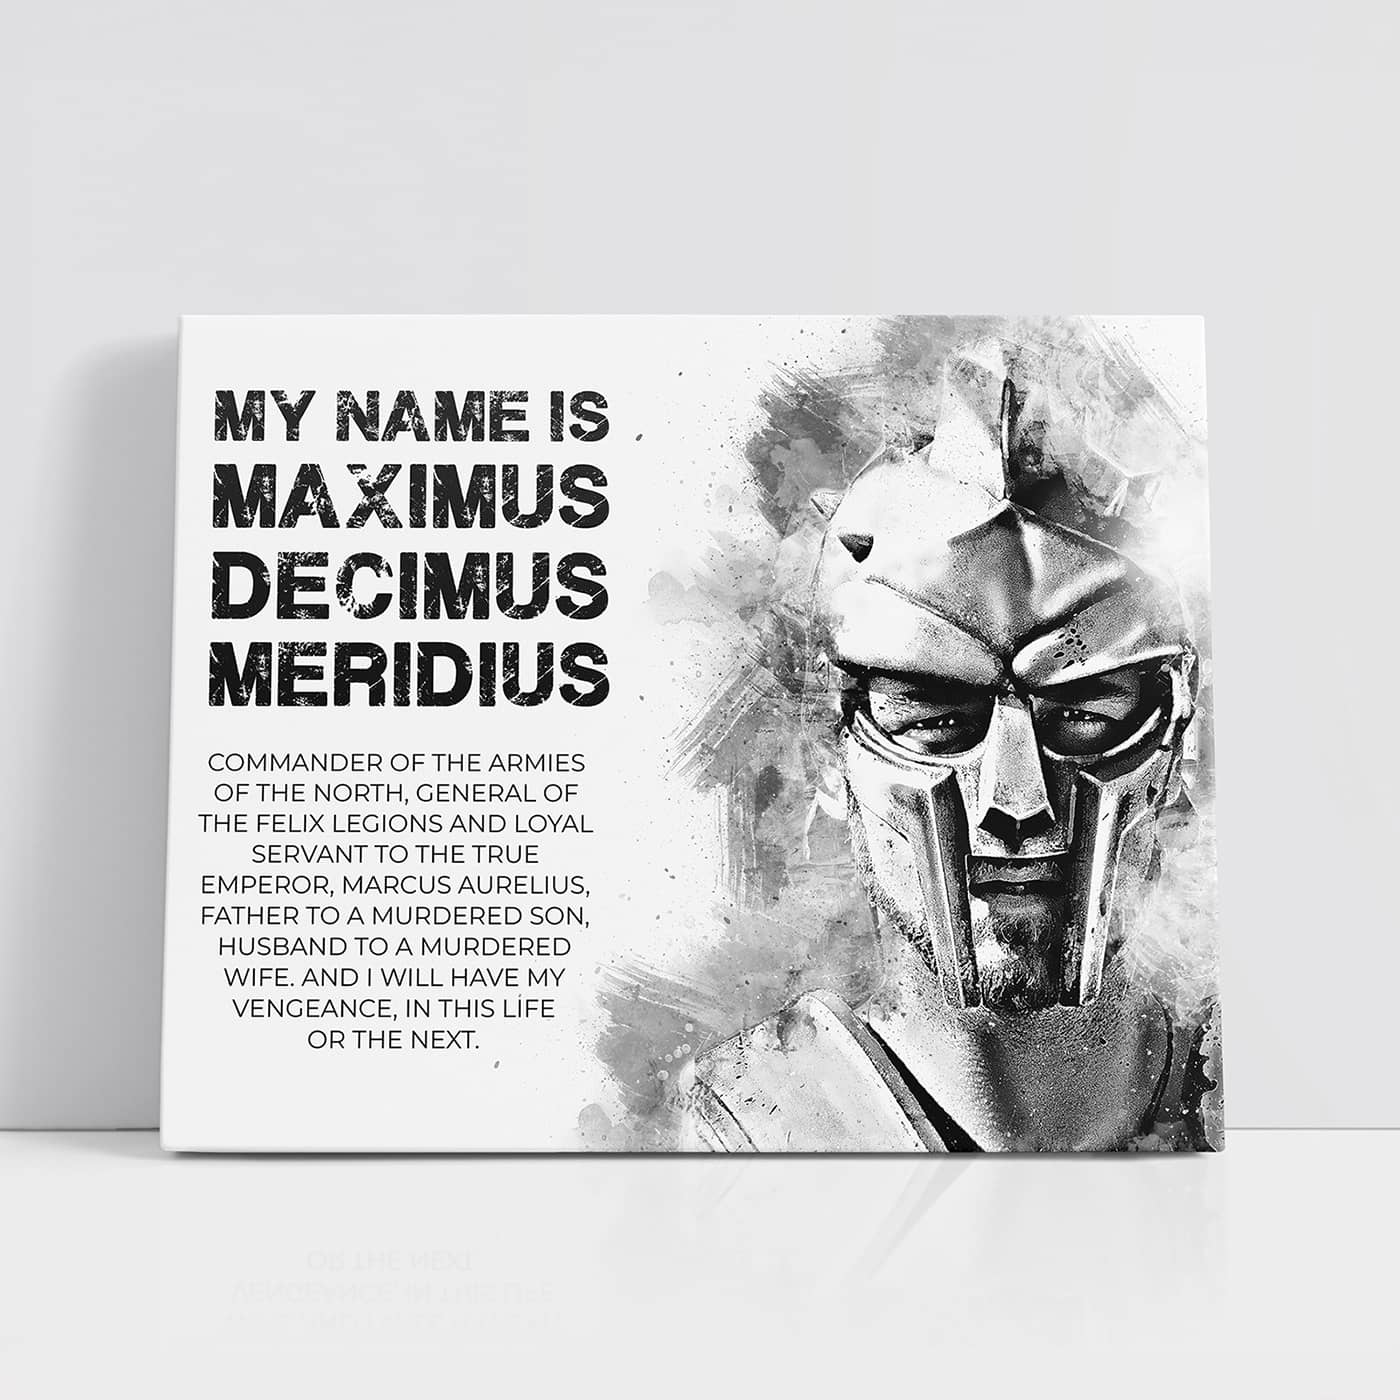 My Name is Maximus is a Gladiator movie canvas that features the character Maximus along with his famous speech